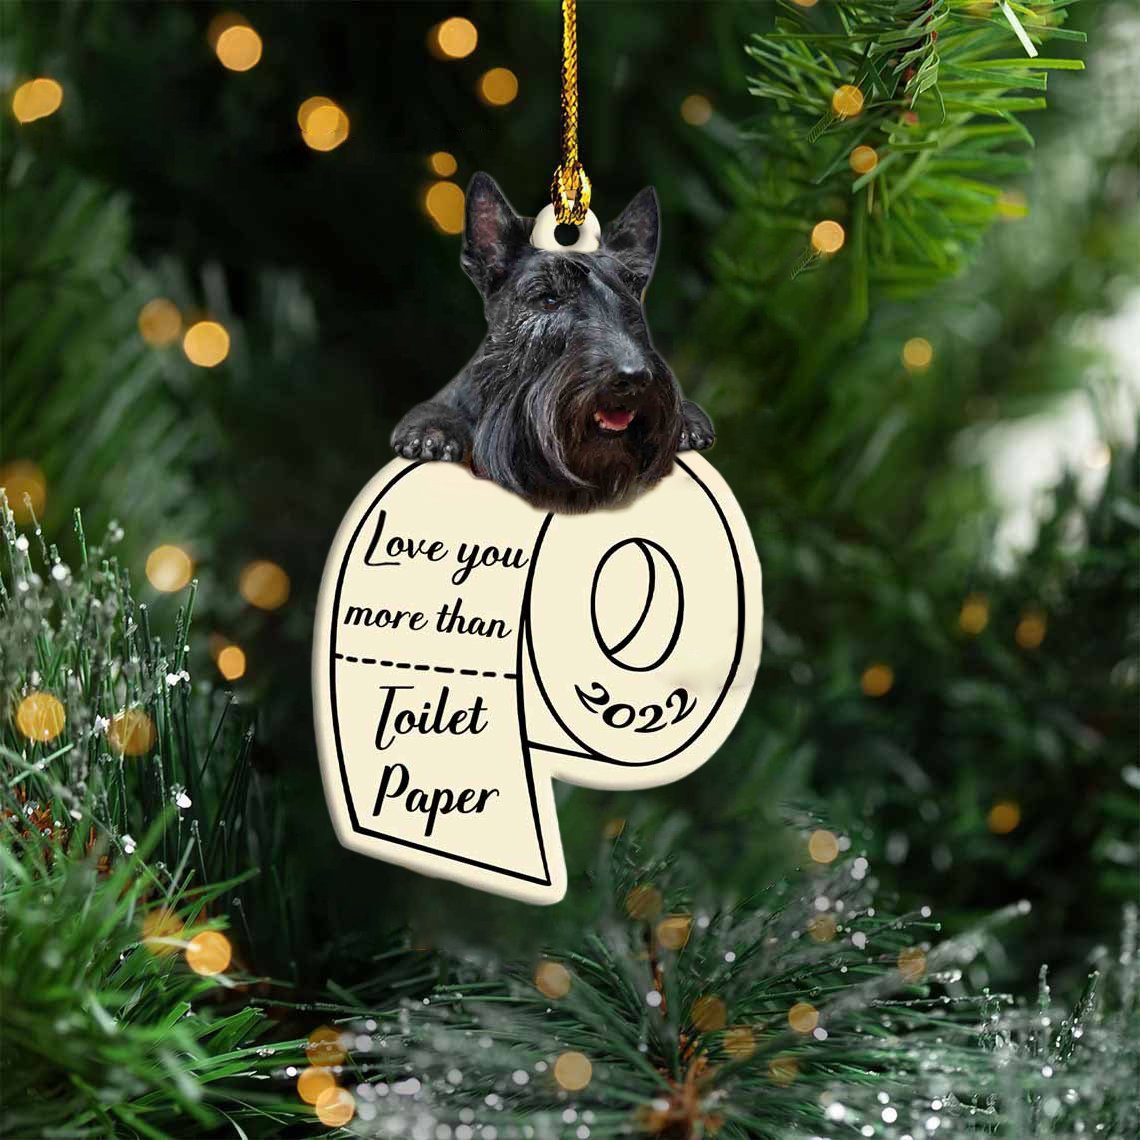 Scottish Terrier Love You More Than Toilet Paper 2022 Hanging Ornament